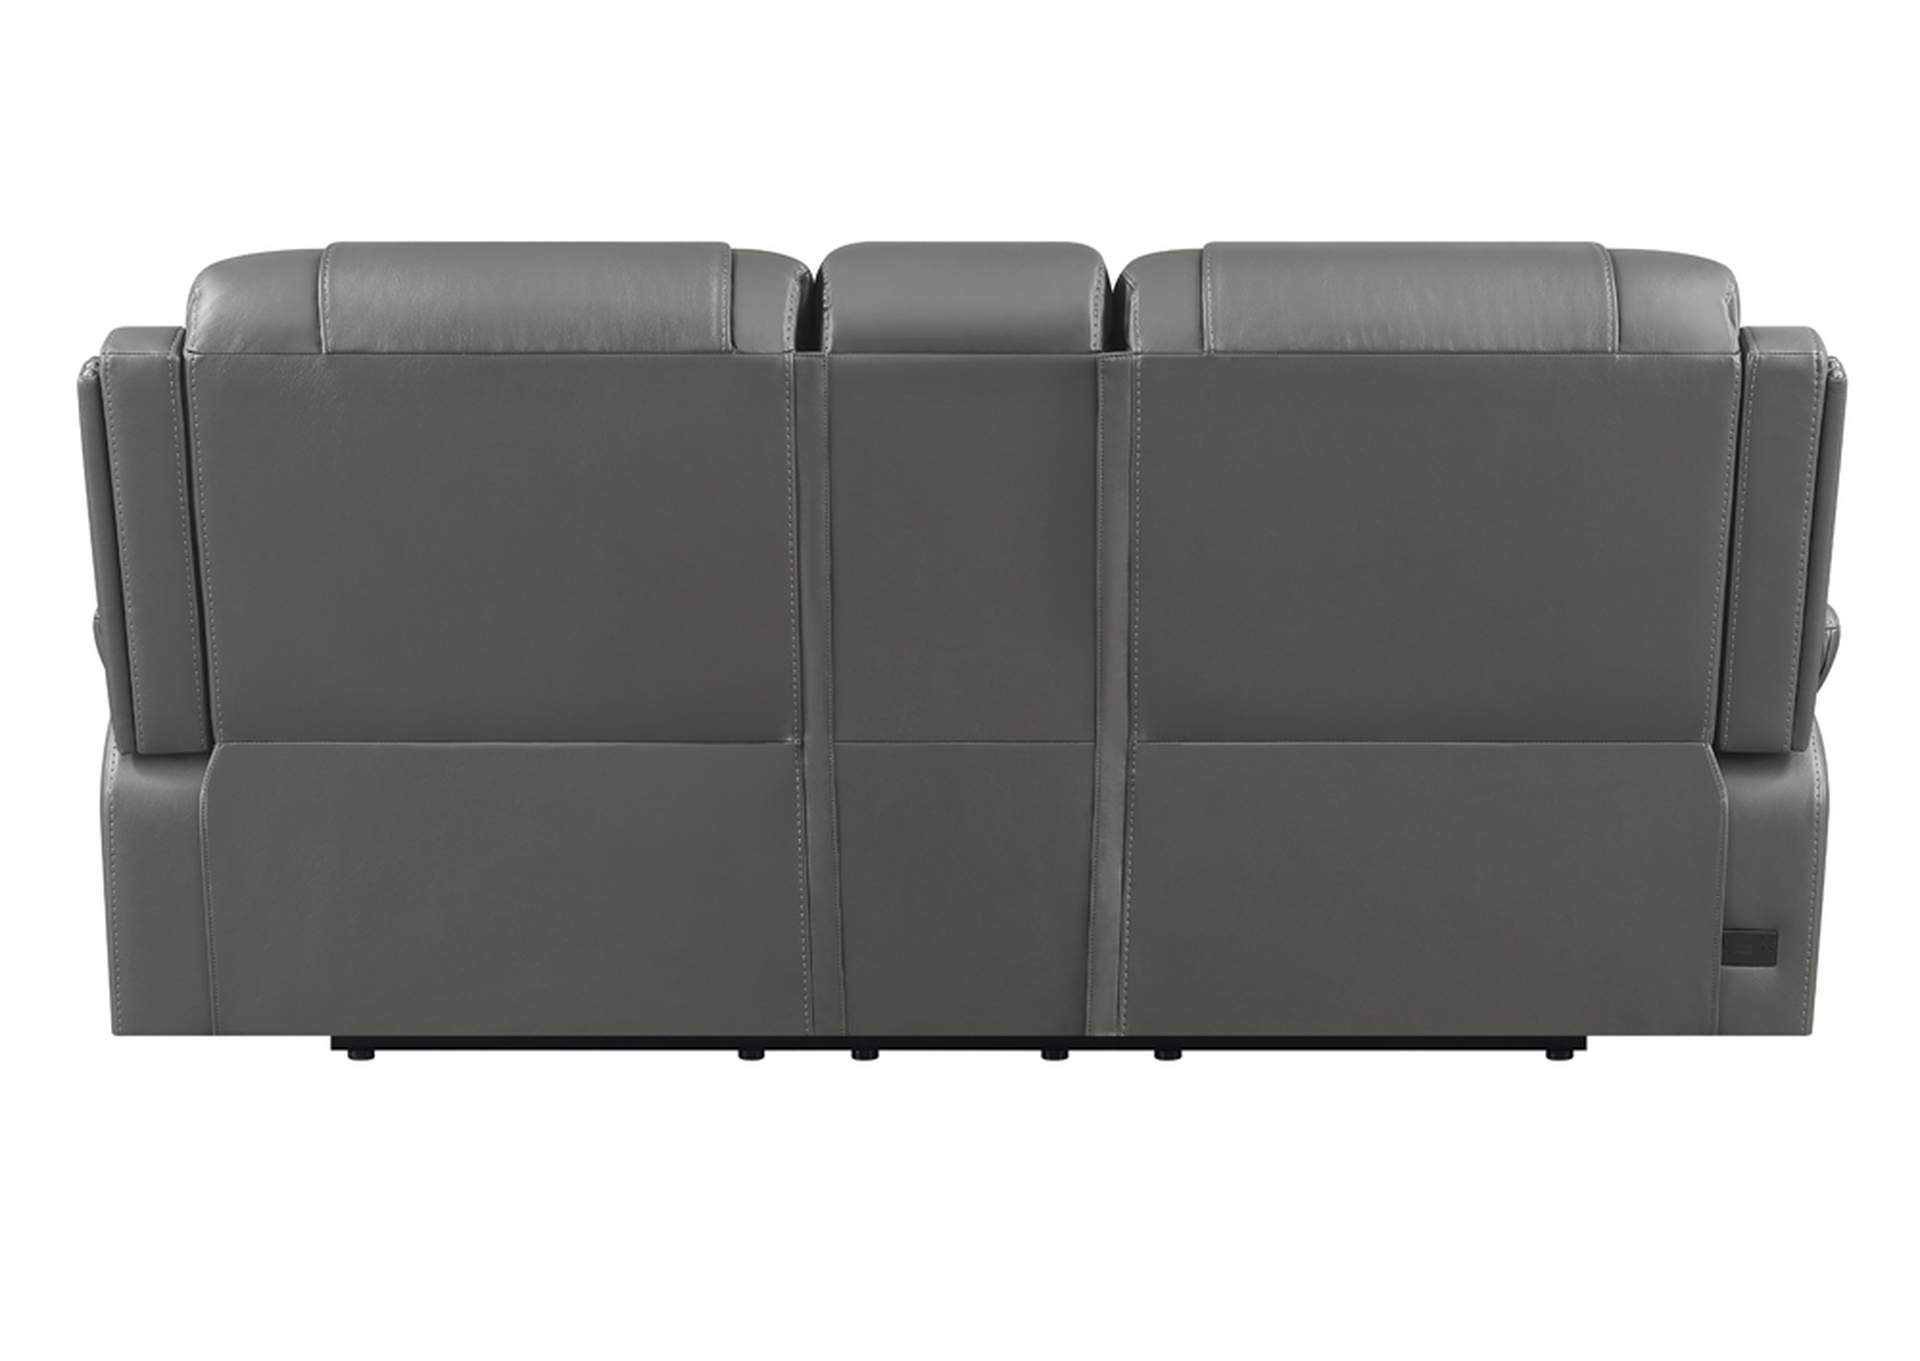 Flamenco Tufted Upholstered Power Loveseat with Console Charcoal,Coaster Furniture